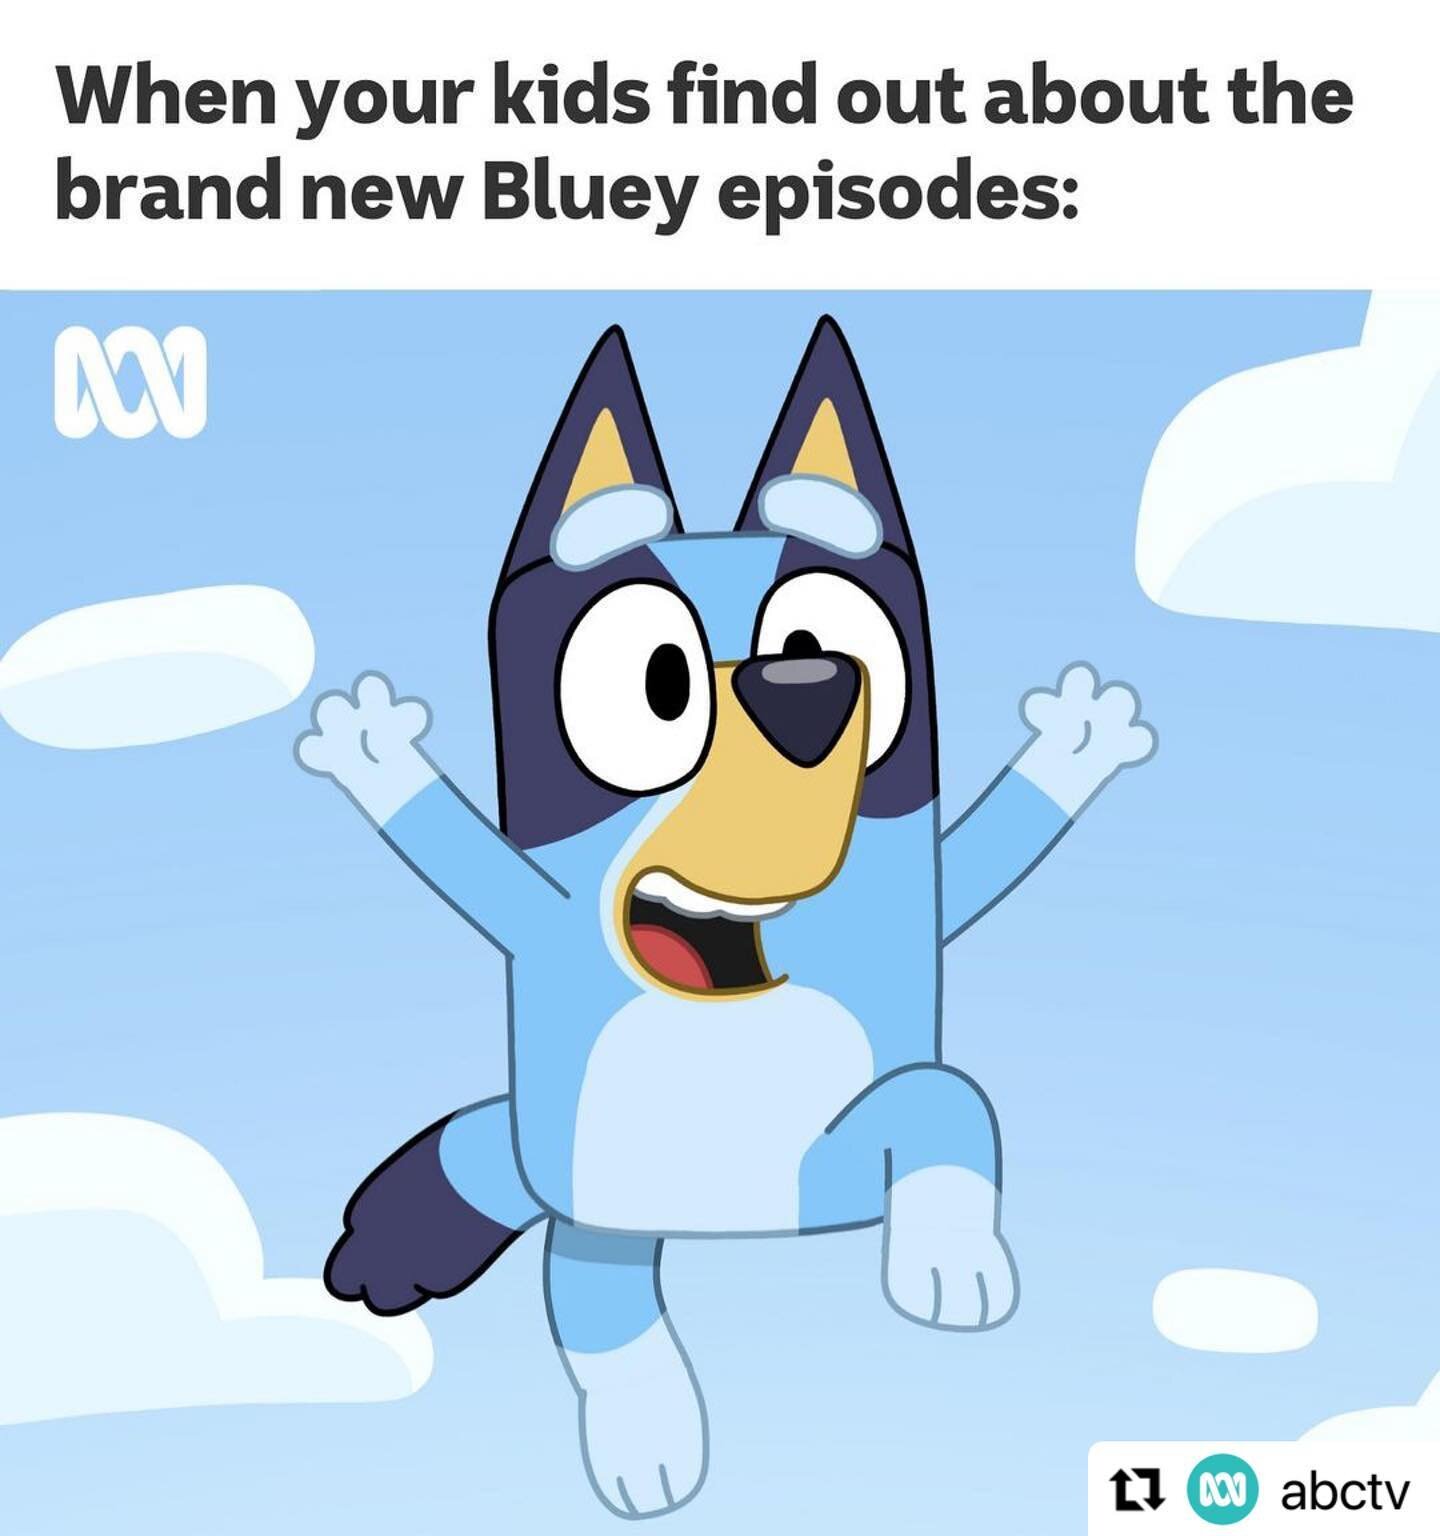 Here is the official announcement!!!
#newepisodes #april9 #thecountdownison
.
.
#Repost @abctv with @use.repost
・・・
💙💙💙 #Bluey

Watch April 9 on ABC Kids or streaming on ABC iview.

#FamilyFunday #NewBluey #KidsTV
@officialblueytv #Bluey #blueyrec